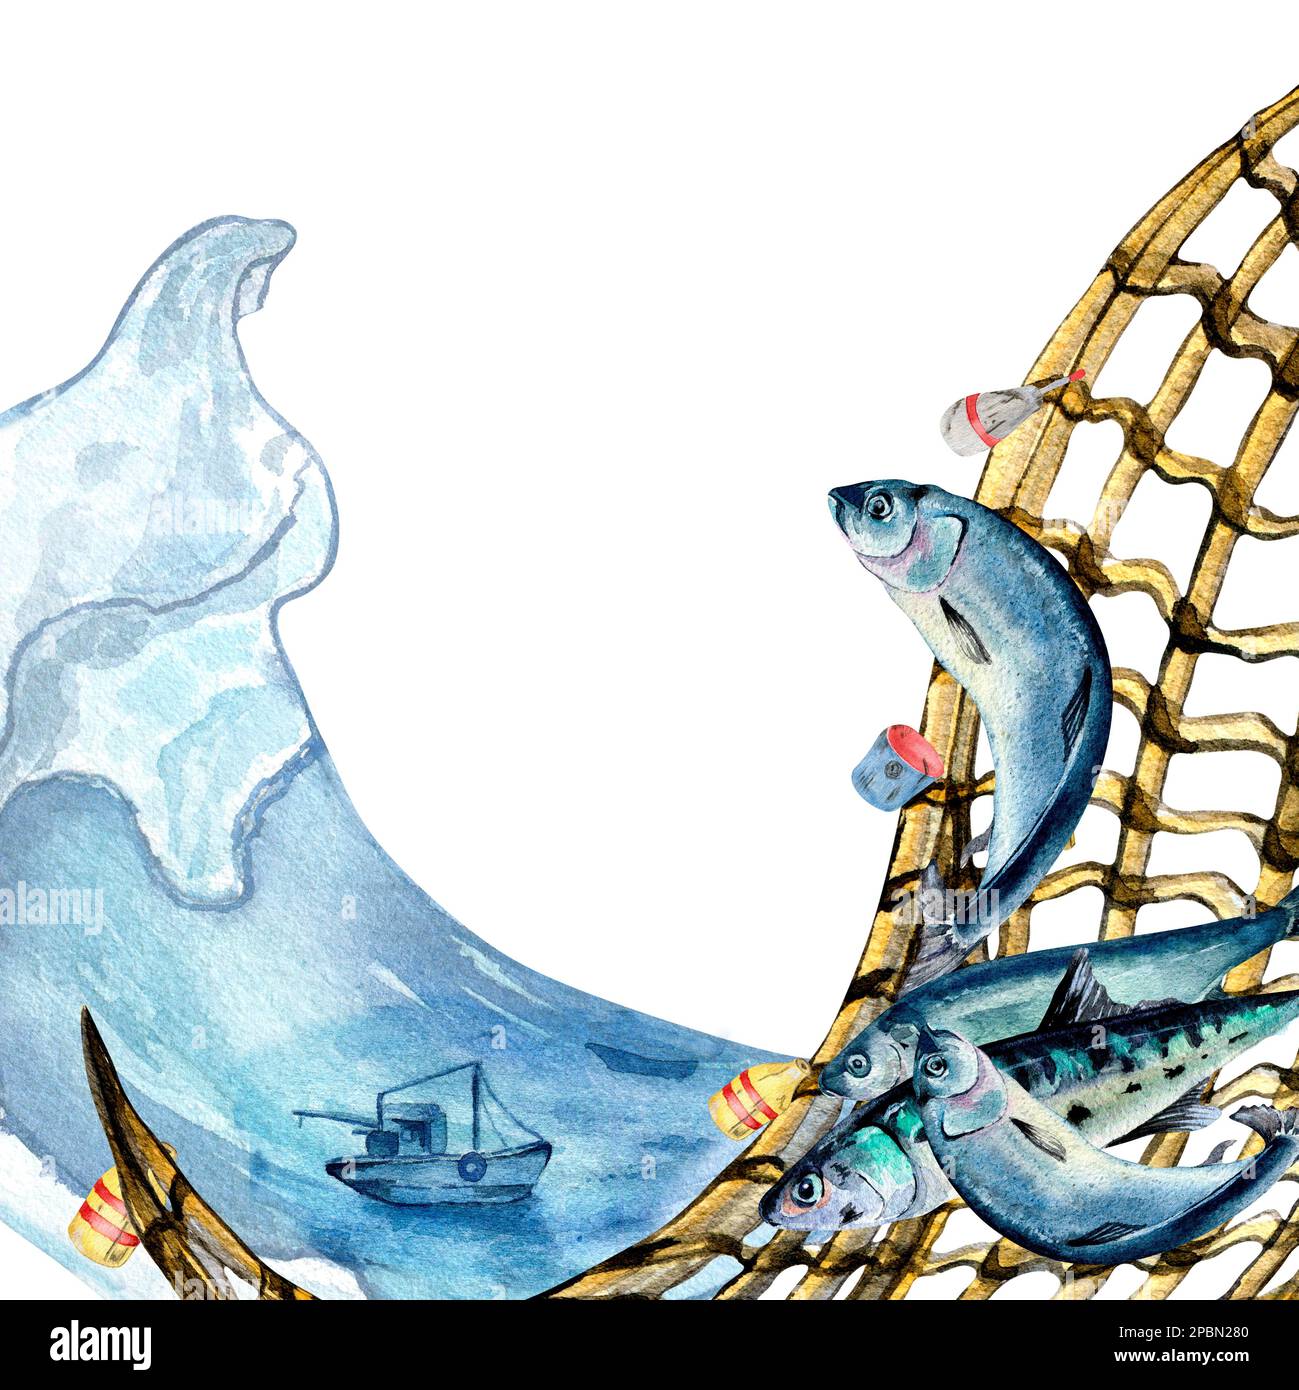 Composition of herring and fishnet watercolor illustration